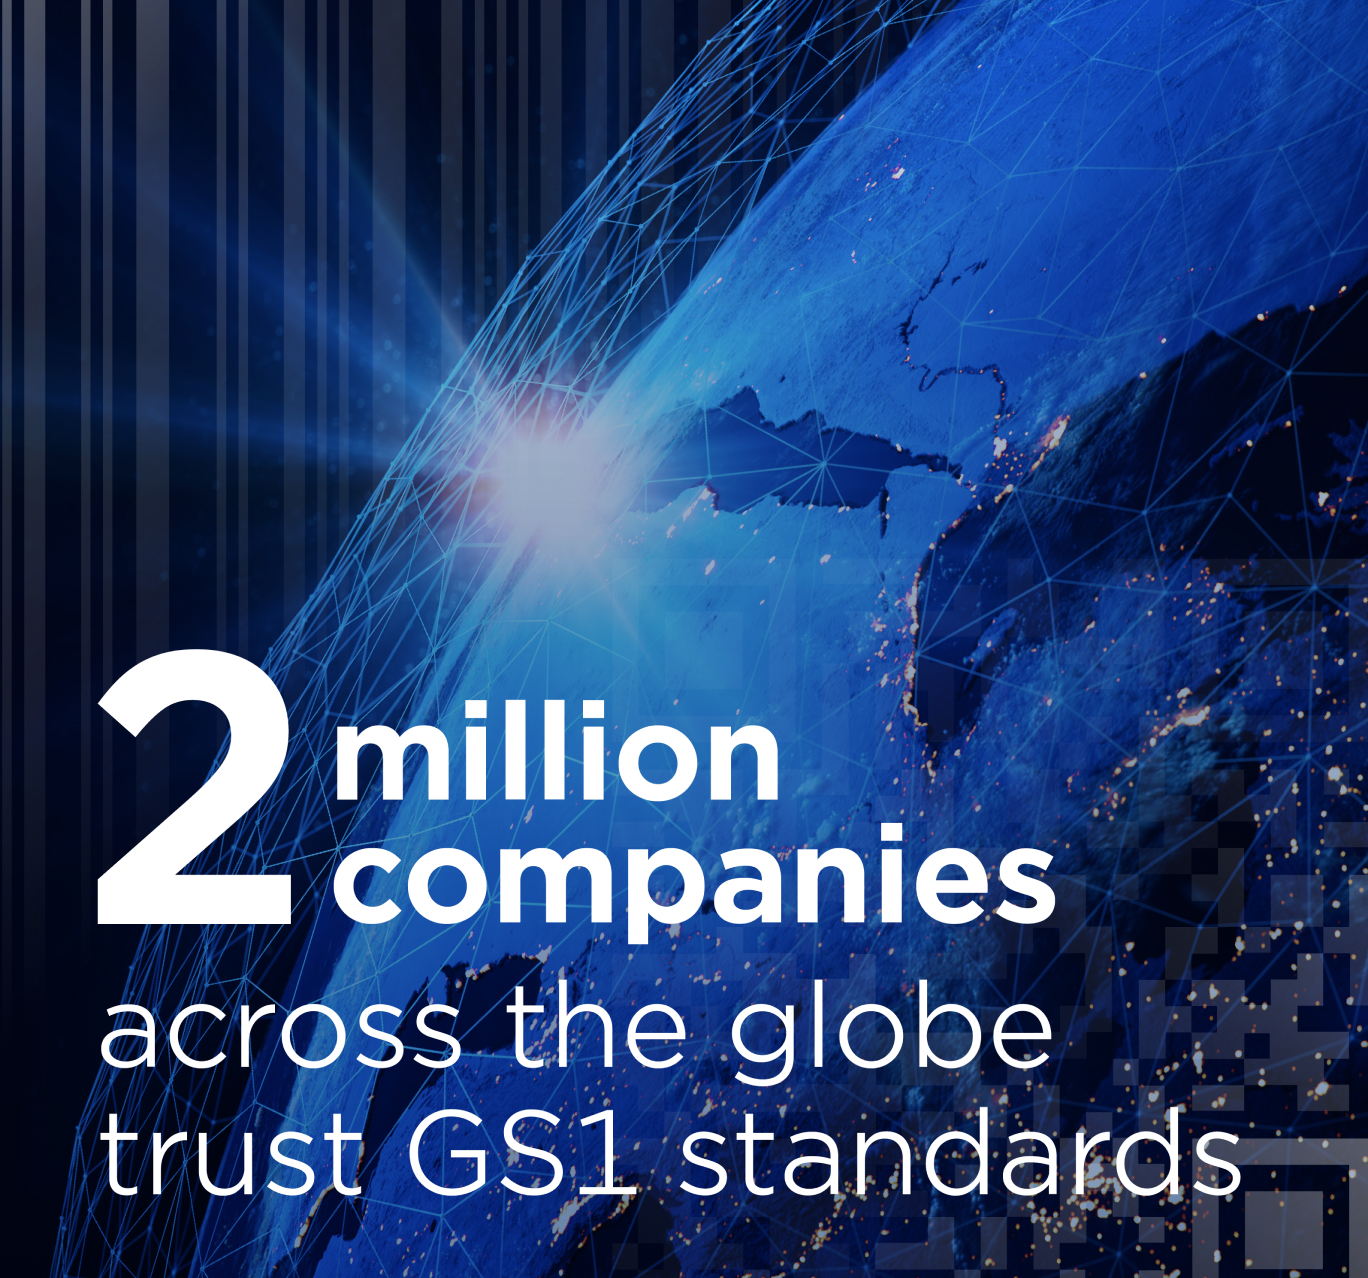 Design of social ad with text that says "2 million companies across the globe trust GS1 standards"